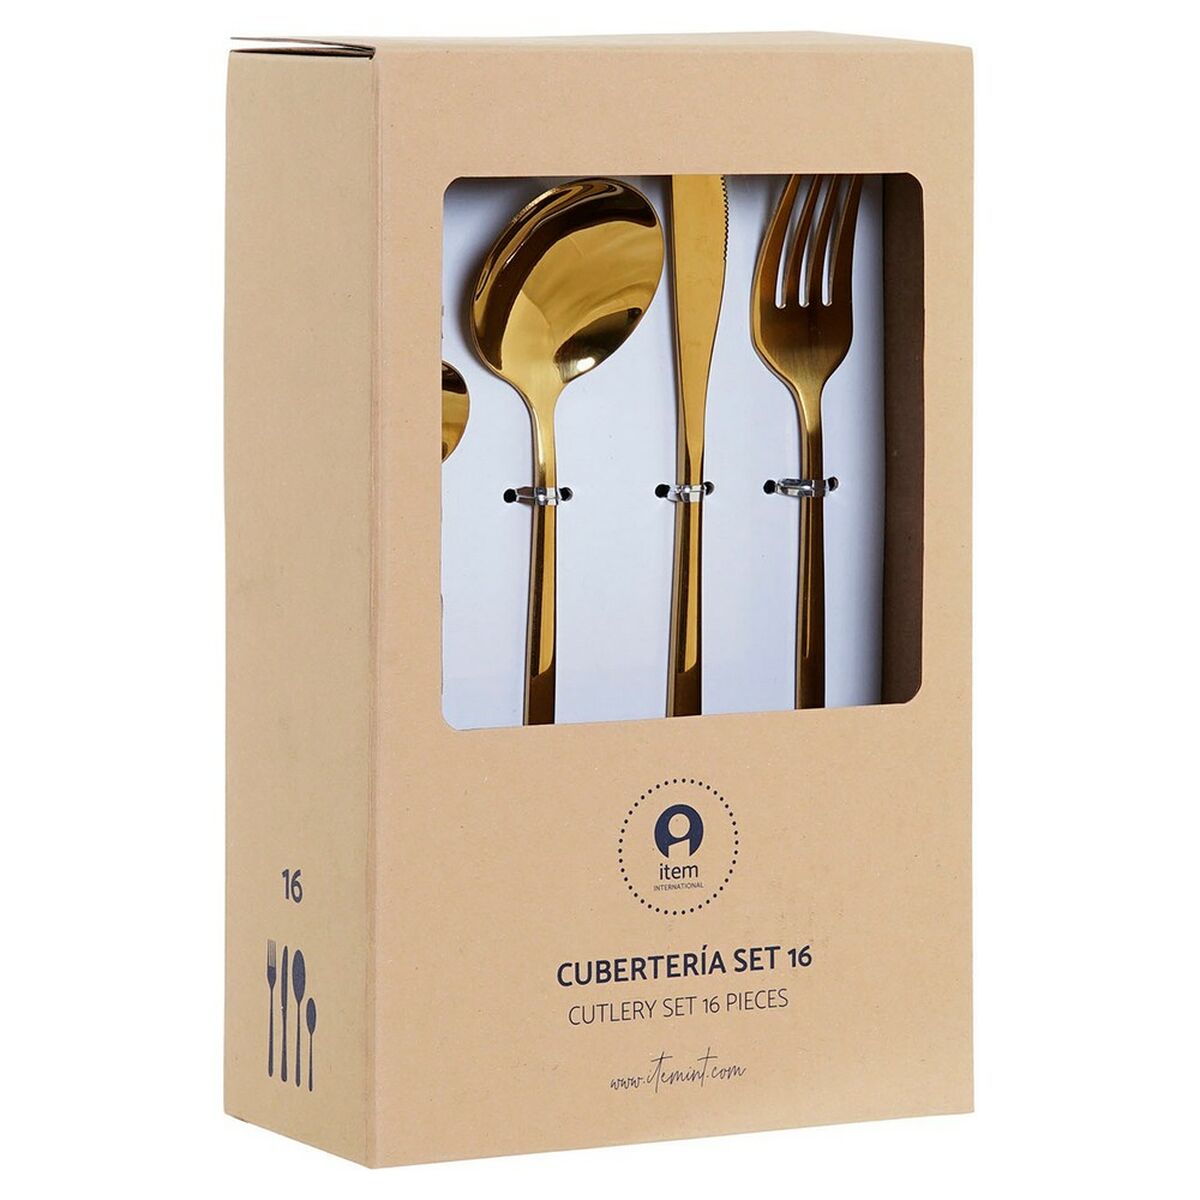 Cutlery set Golden Stainless steel and White (2 x 1,2 x 22,5 cm) (16 Pieces)